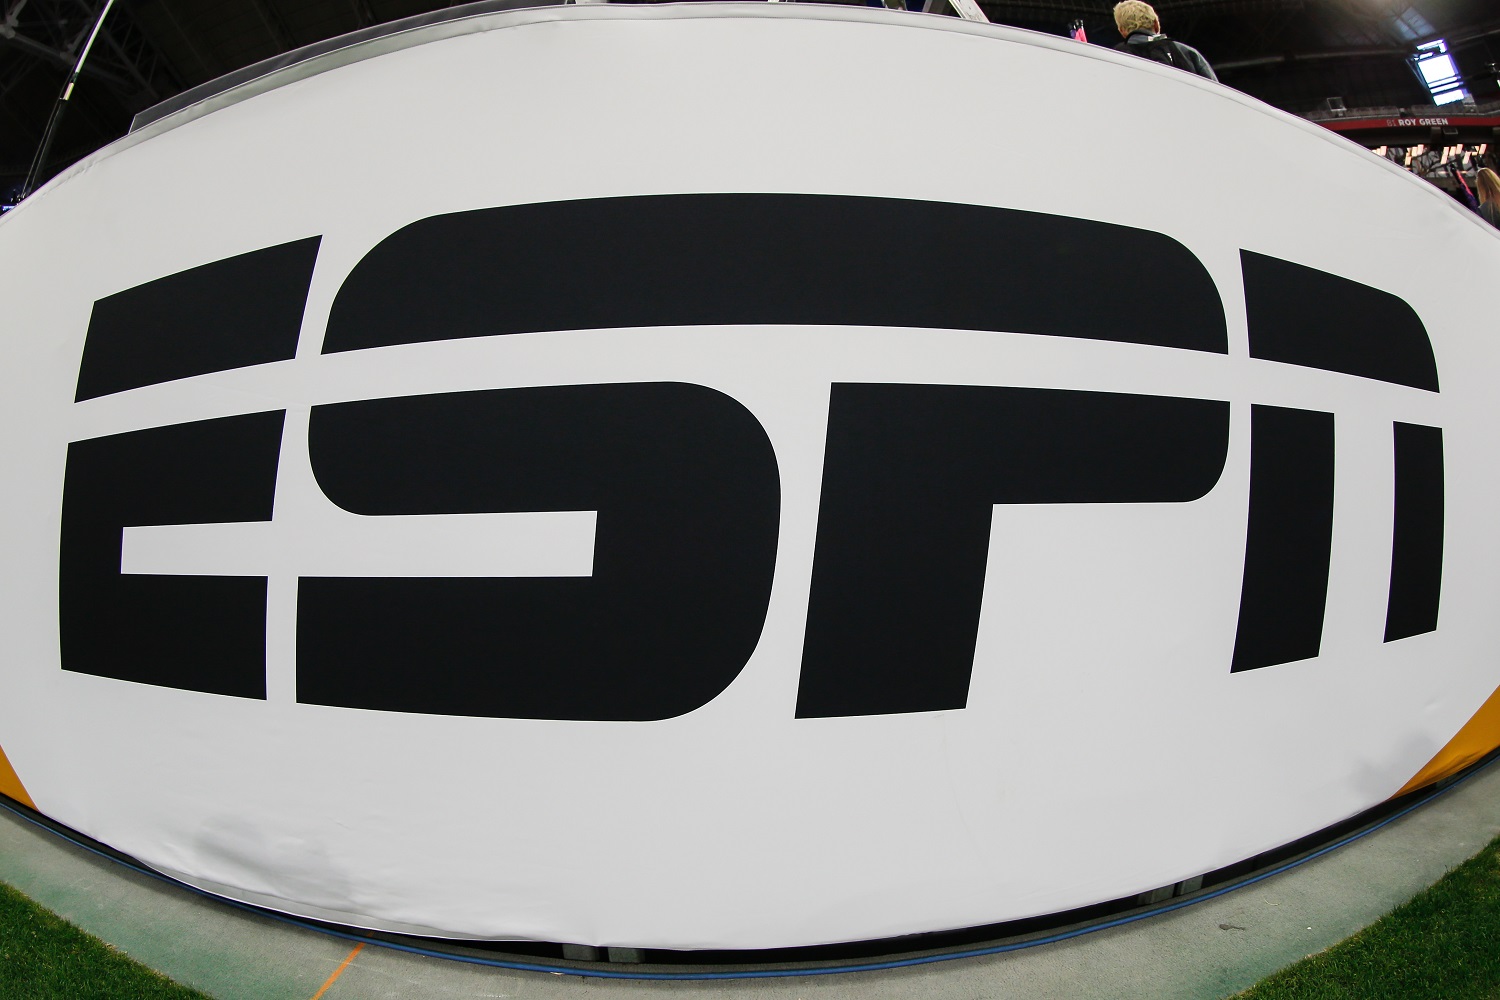 The ESPN logo before the Fiesta Bowl on Dec. 28, 2019.